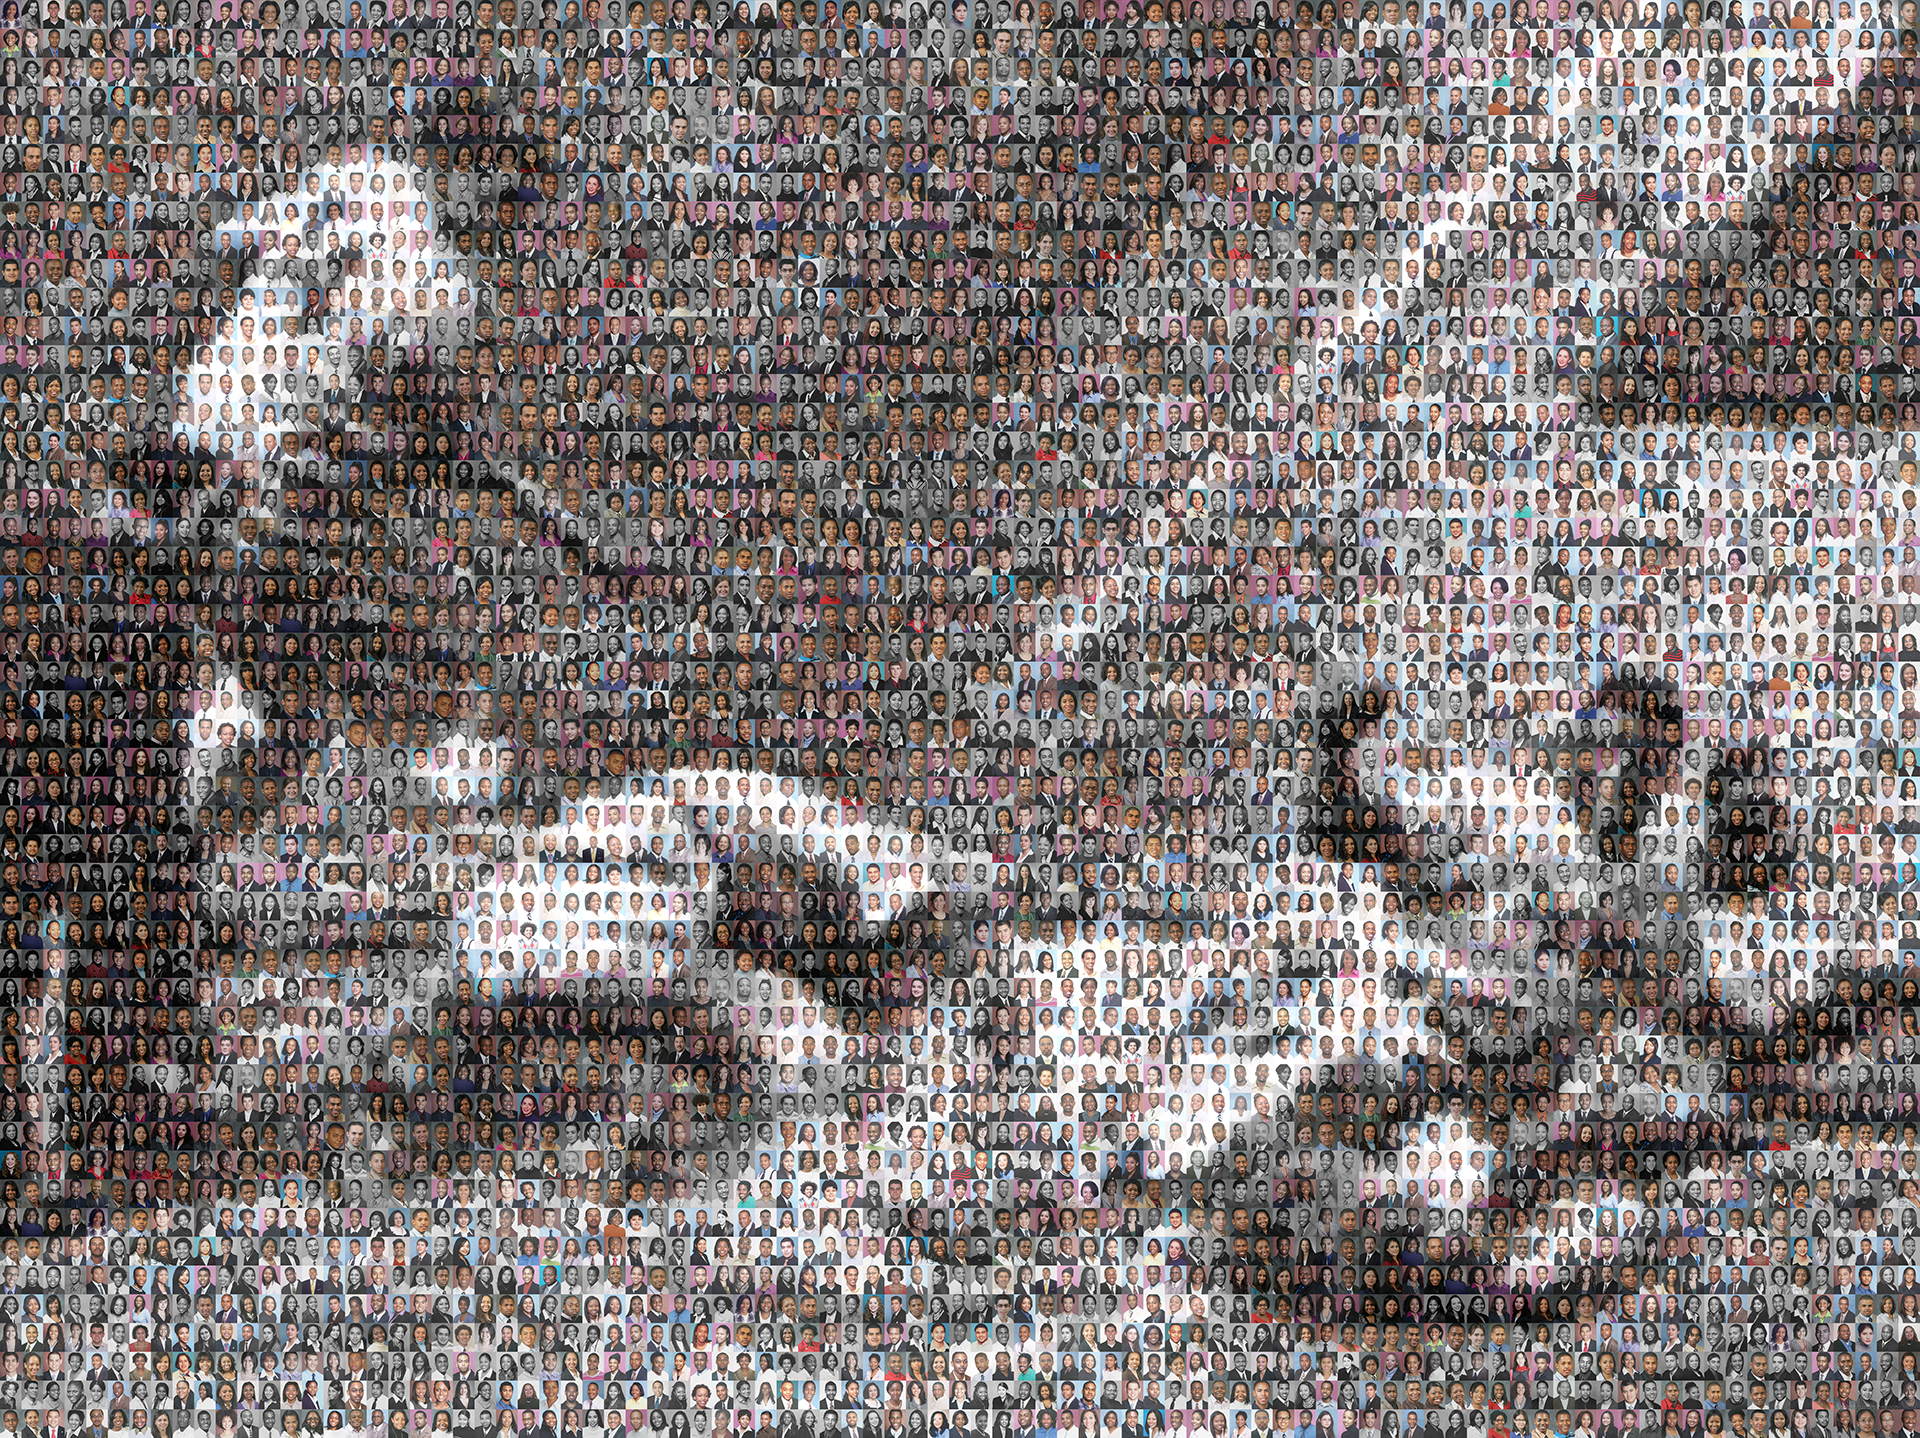 photo mosaic created using 783 student photos to commorate the famous baseball player